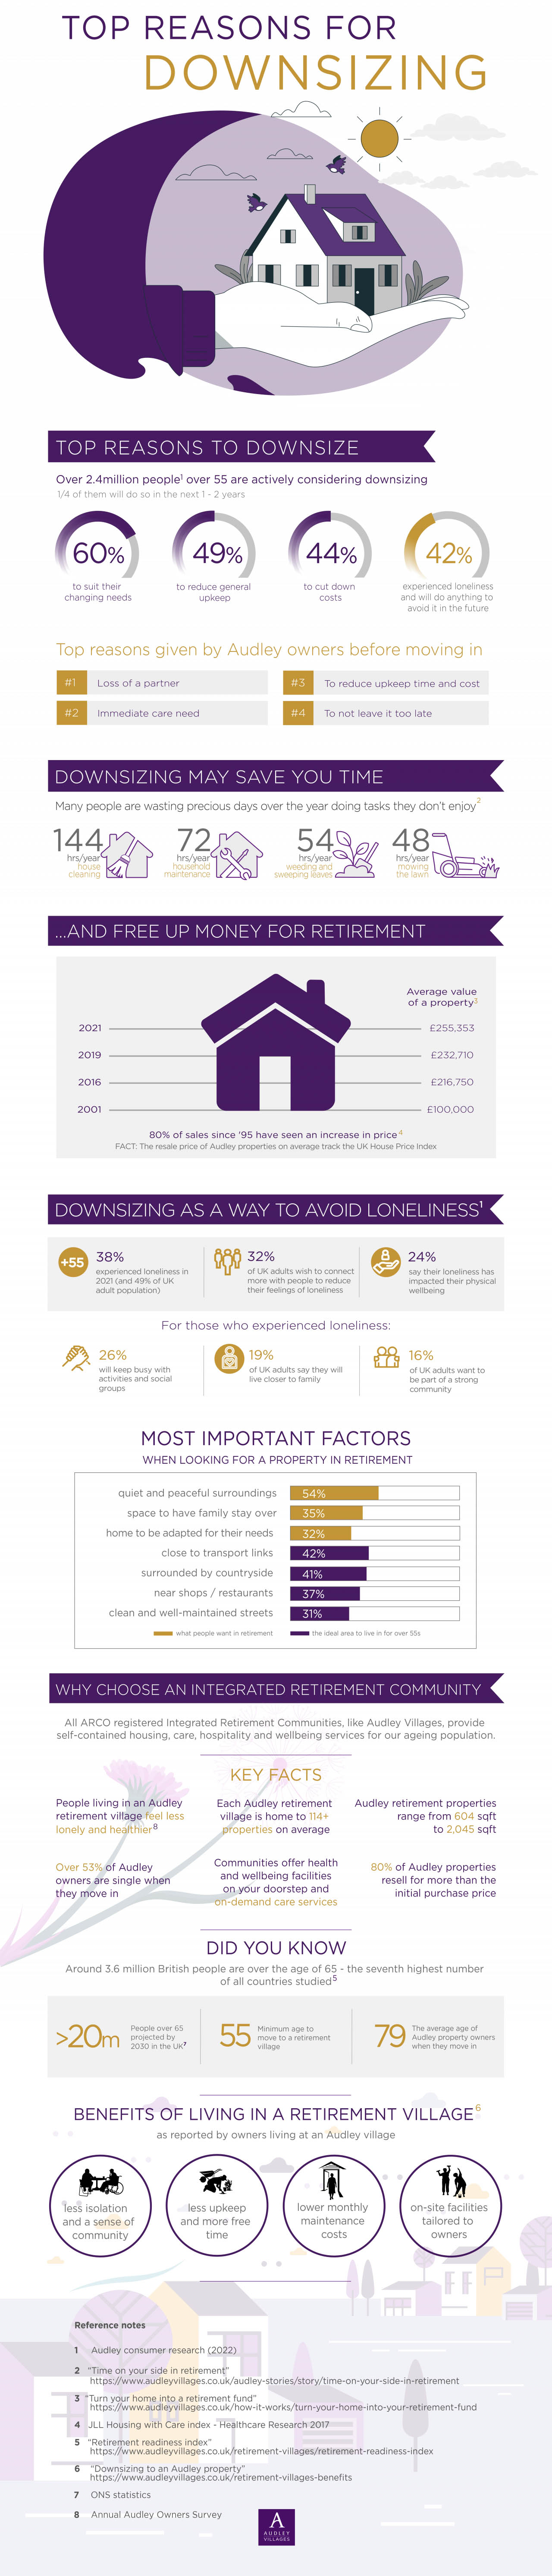 Top Reasons for Downsizing